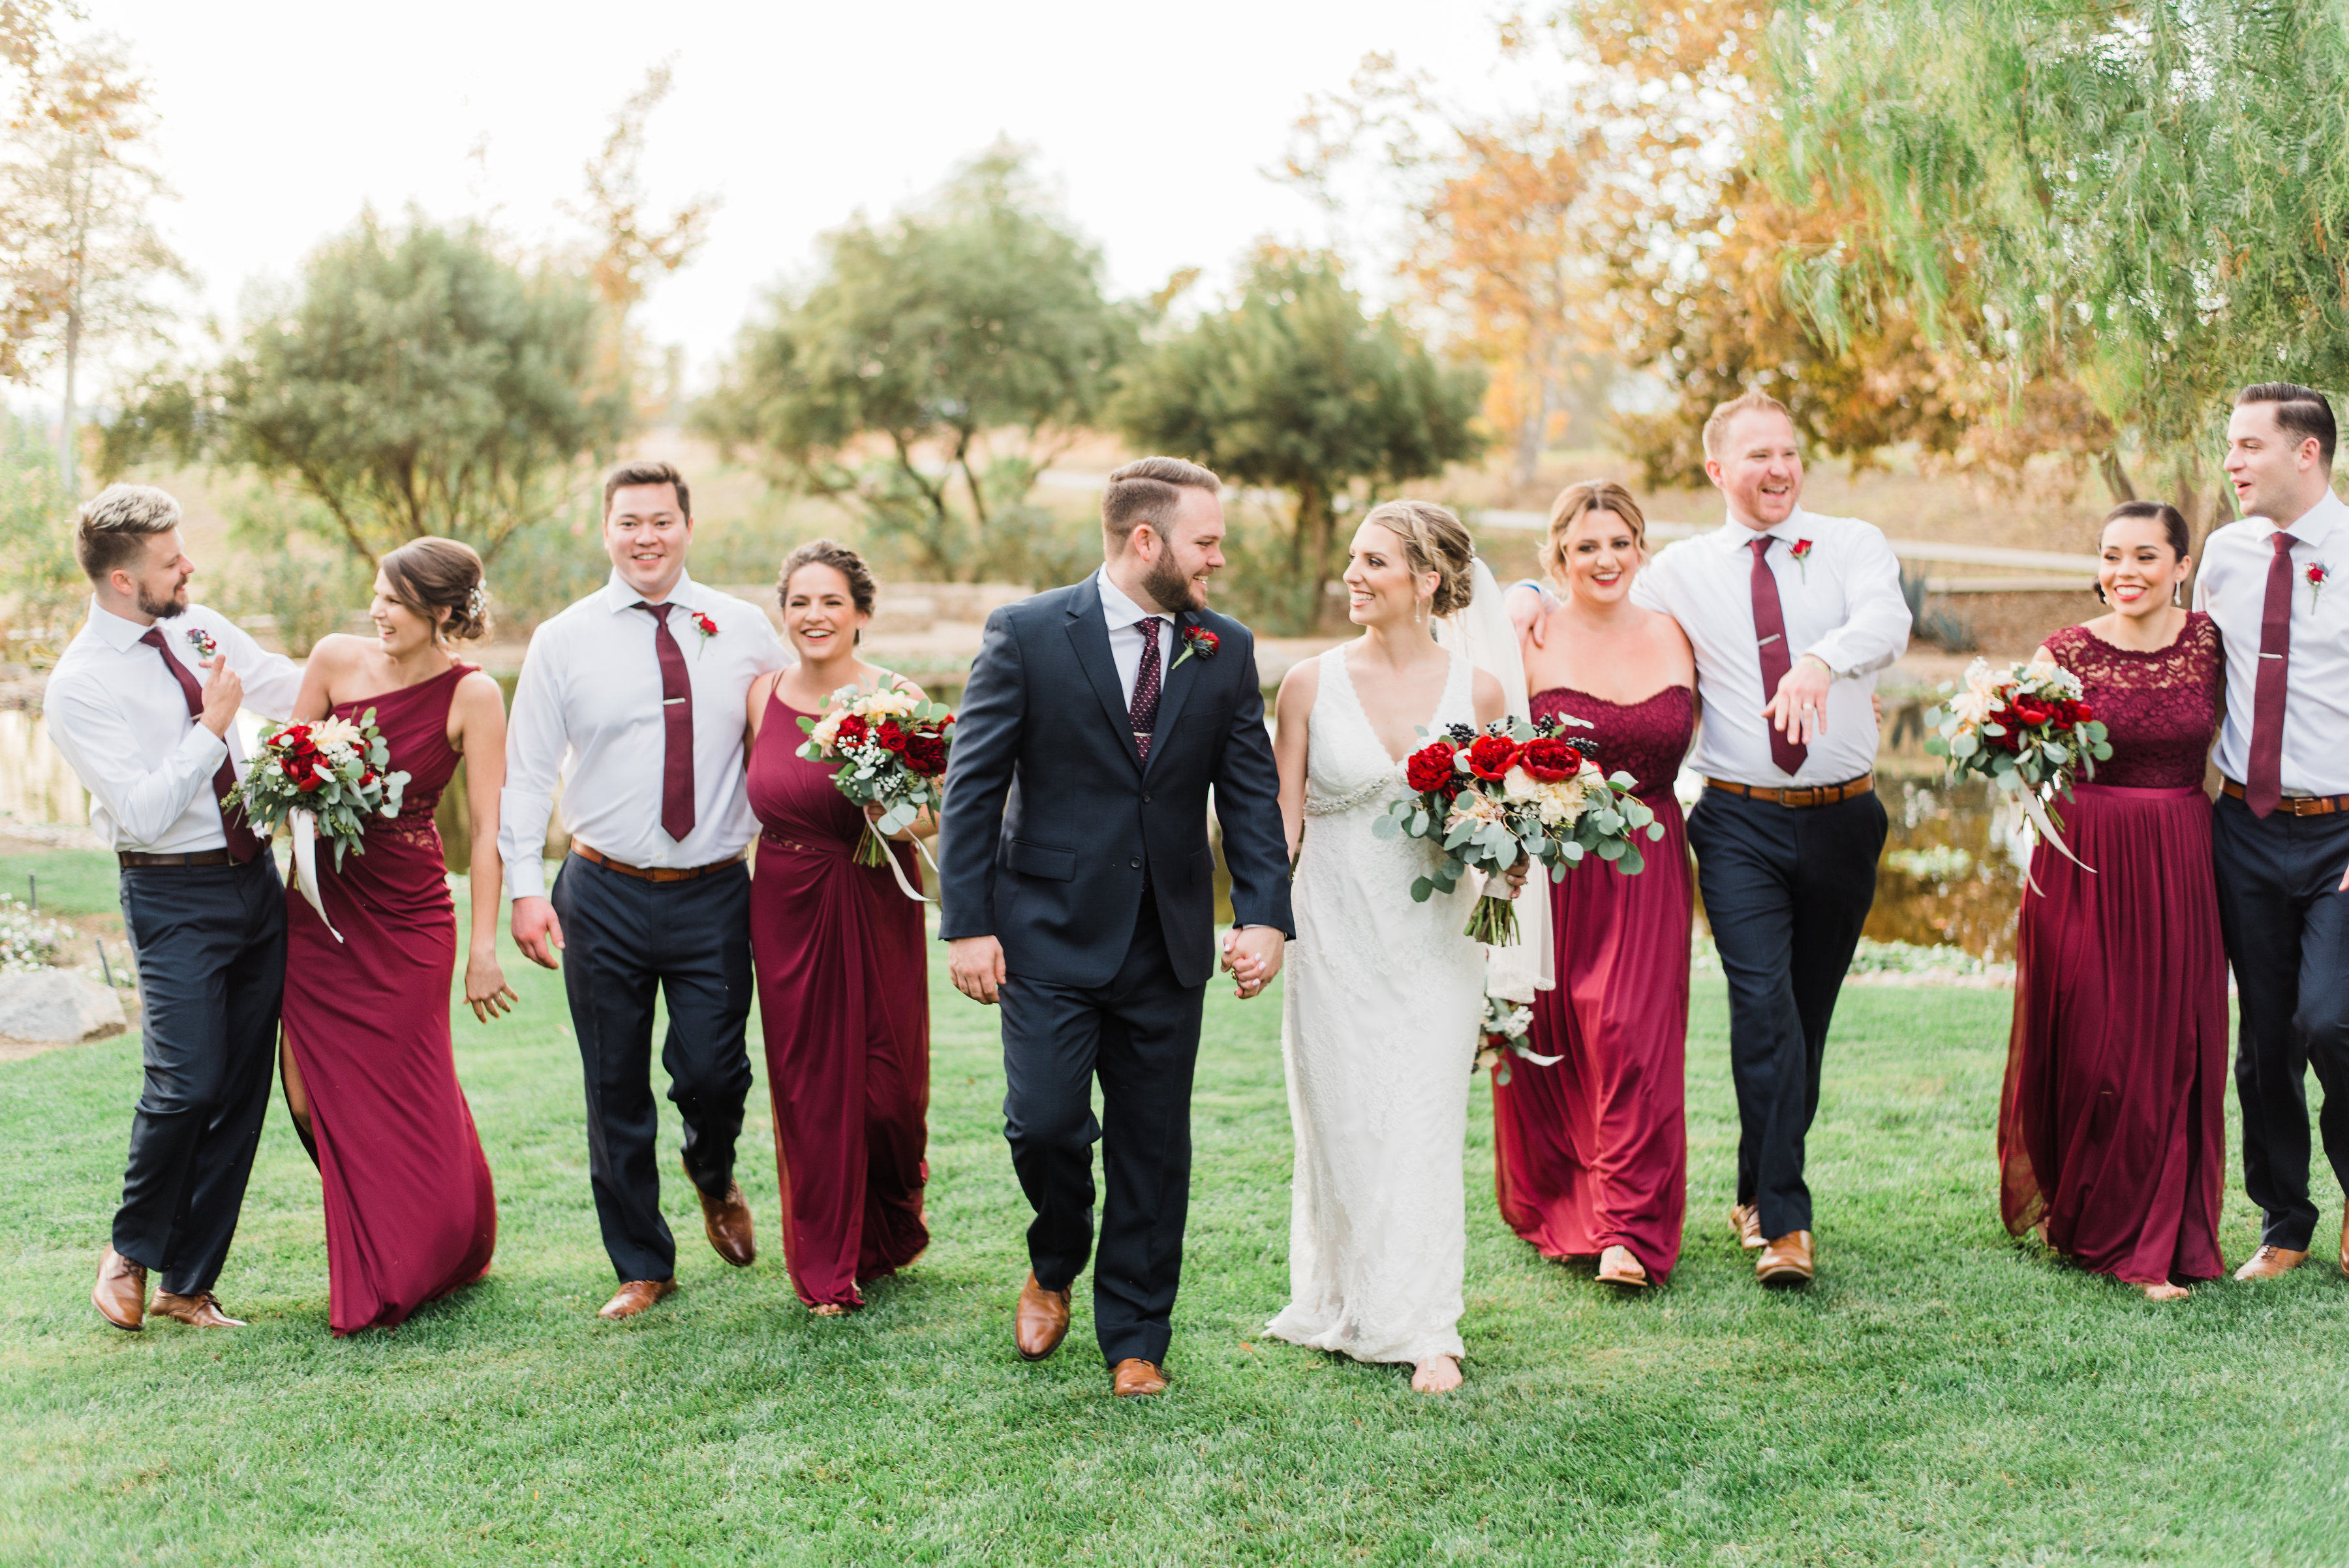 10+ Tips for Fun Bridal Party Pictures - Photography Blog Tips - ISO 1200  Magazine